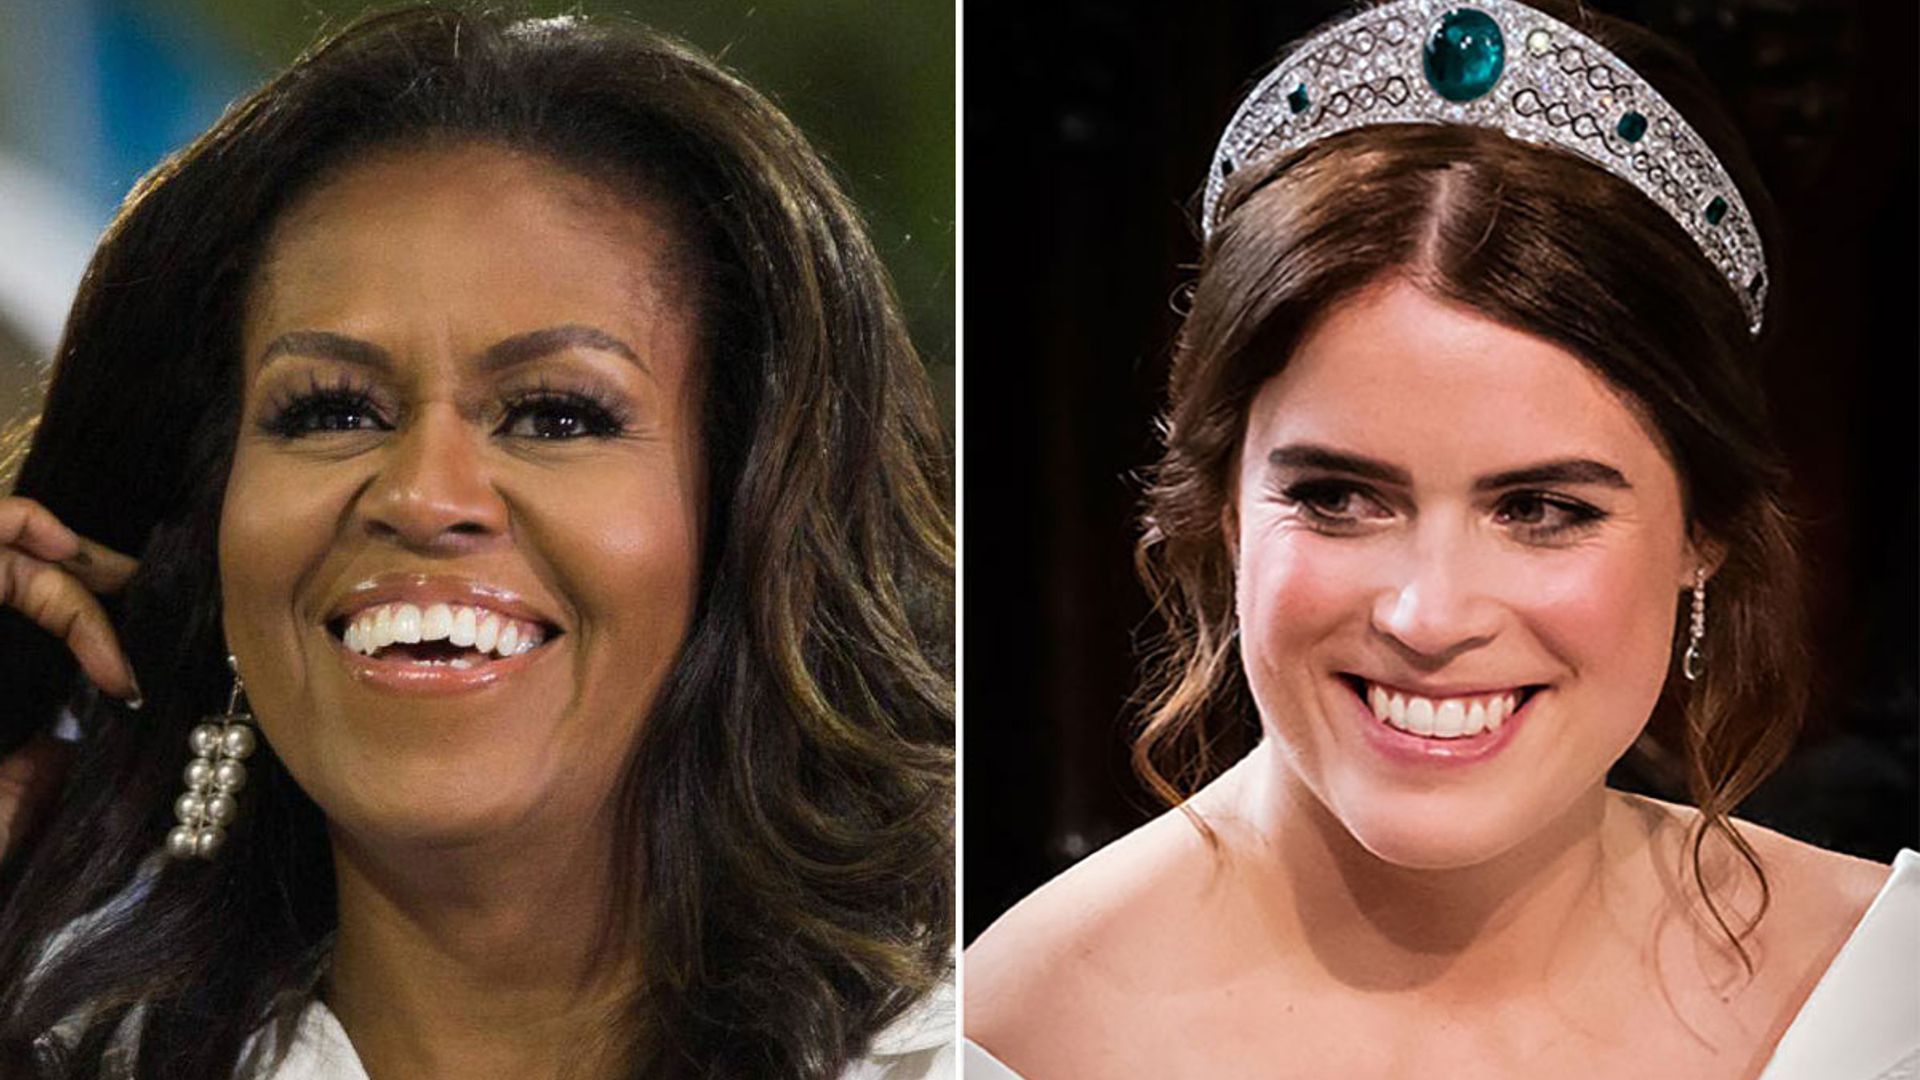 Michelle Obama nailed this wedding dress style 26 years before Princess Eugenie